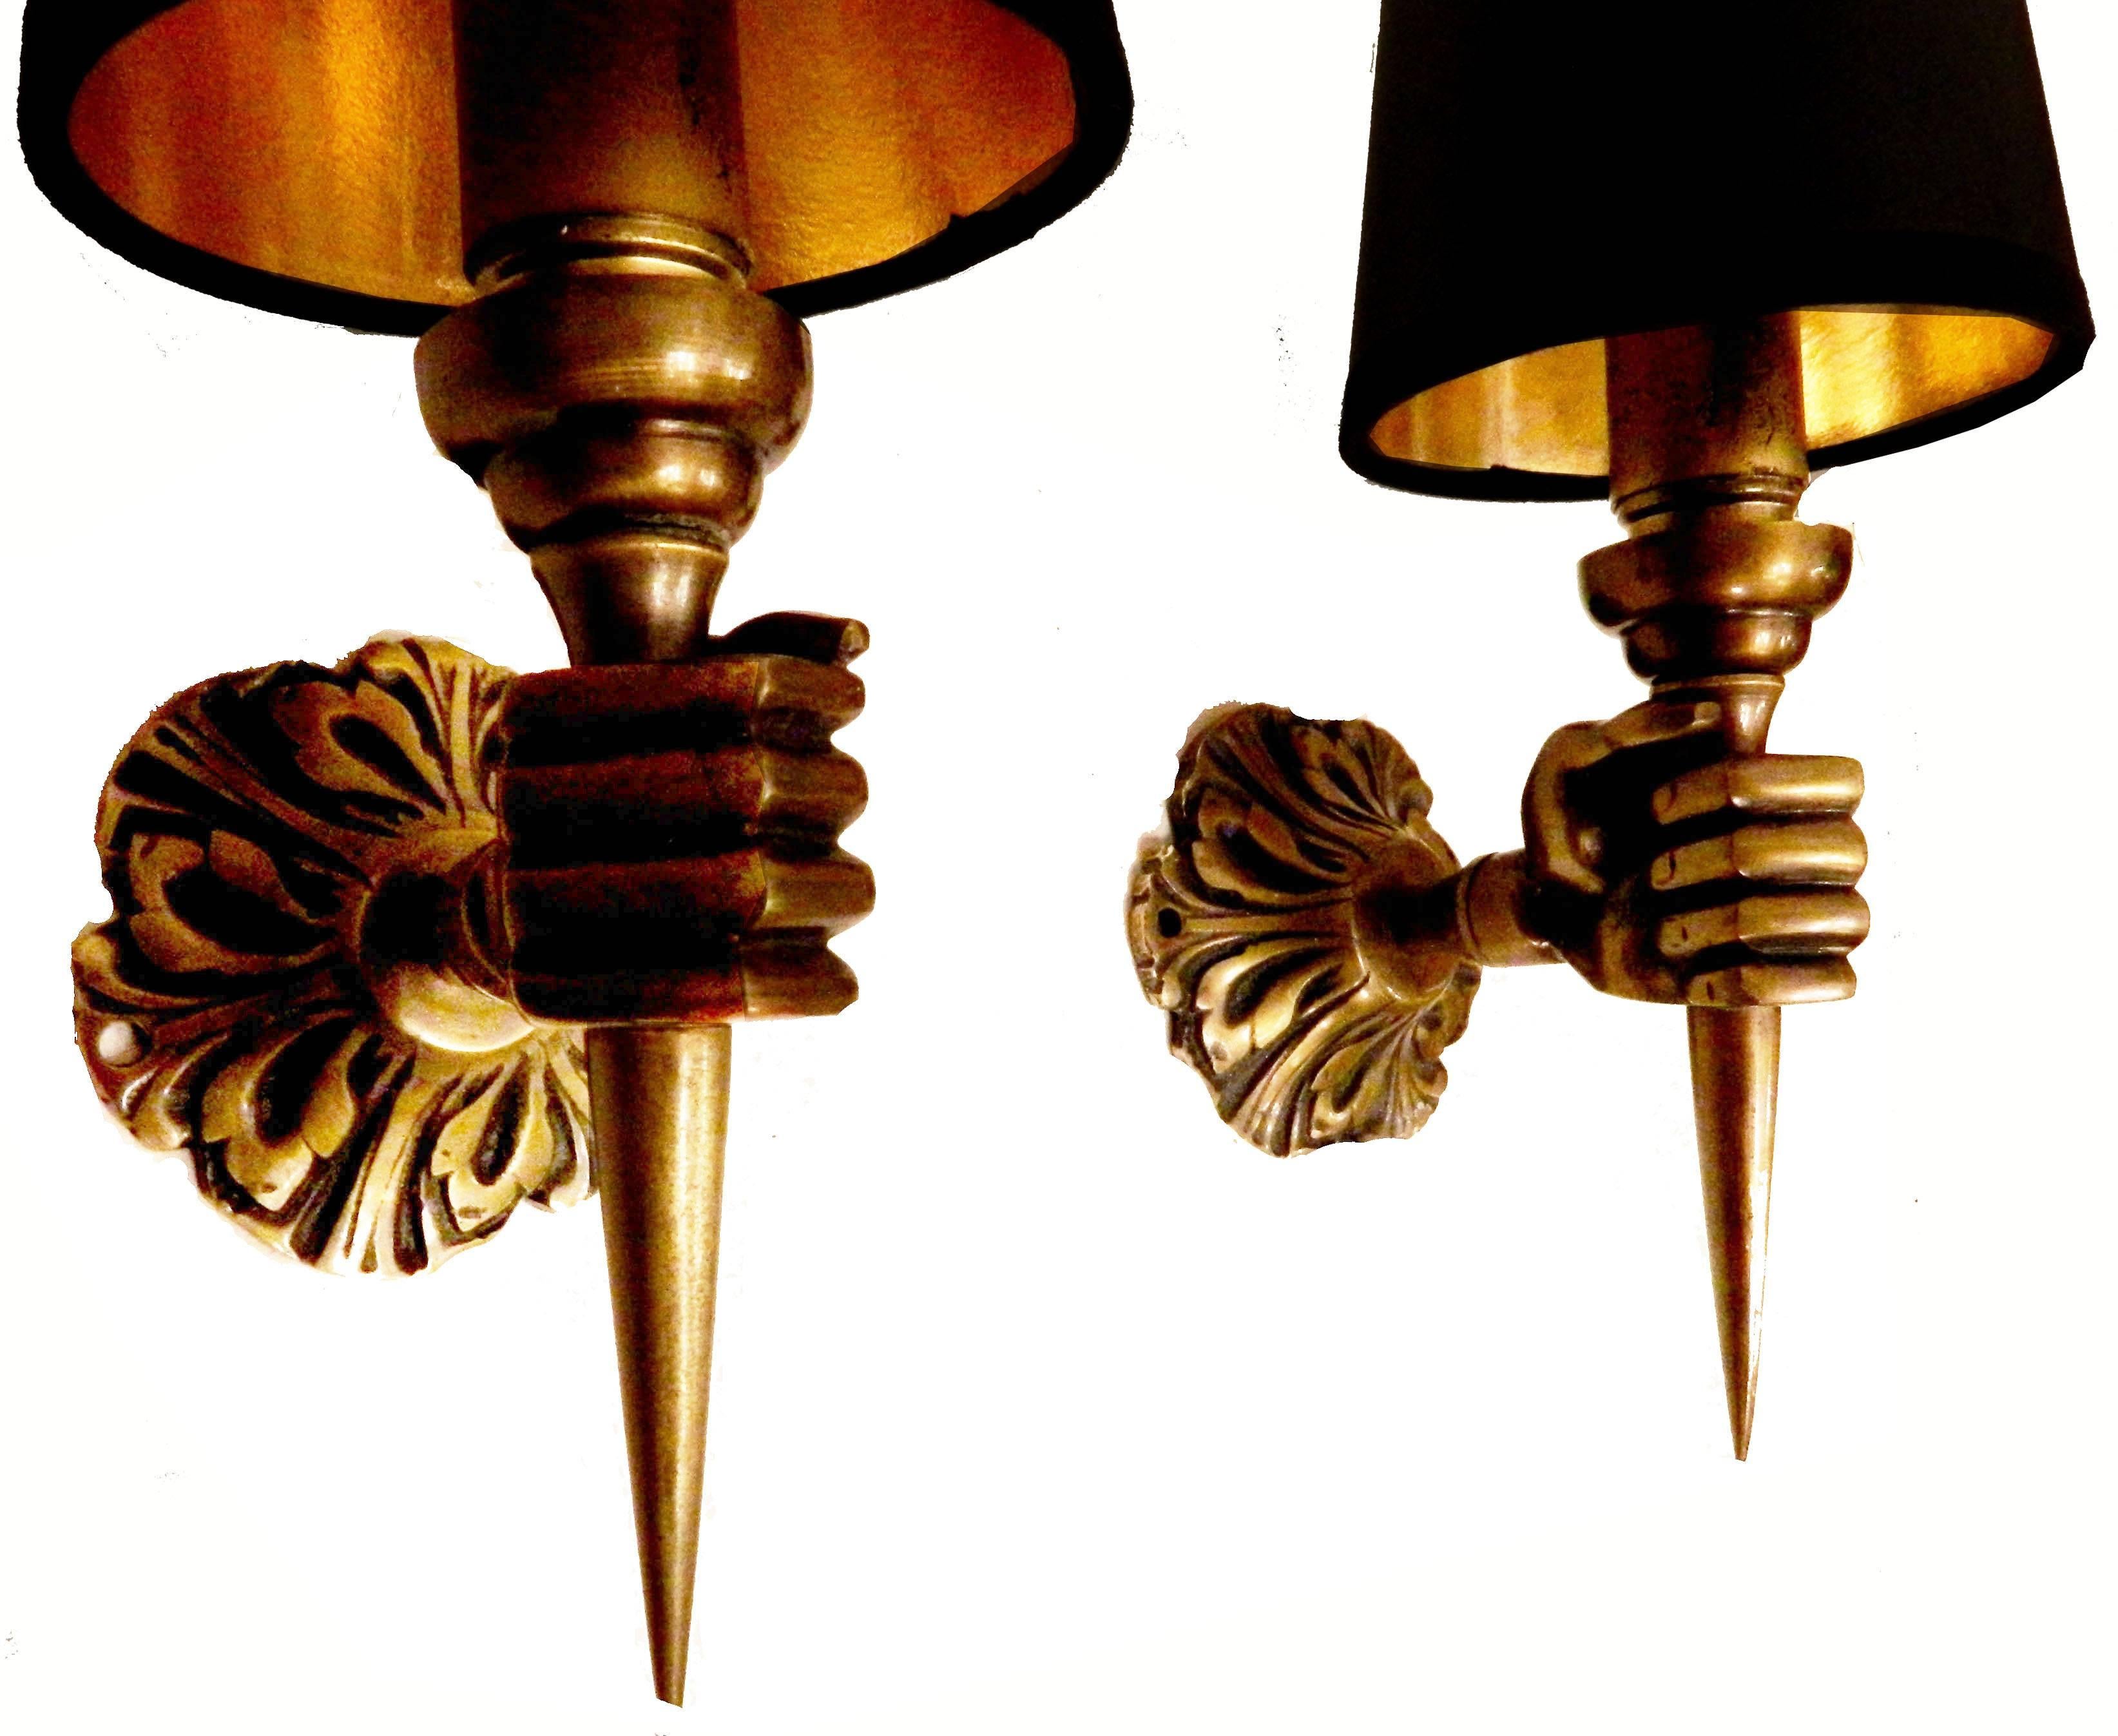 4 pairs of brass ARBUS brass French sconces featuring a hand holding a torch. Opposite hands, circa 1940s.
1 pair in silver opposite hands (last image)
Measurements:
Projection to the wall 4.5